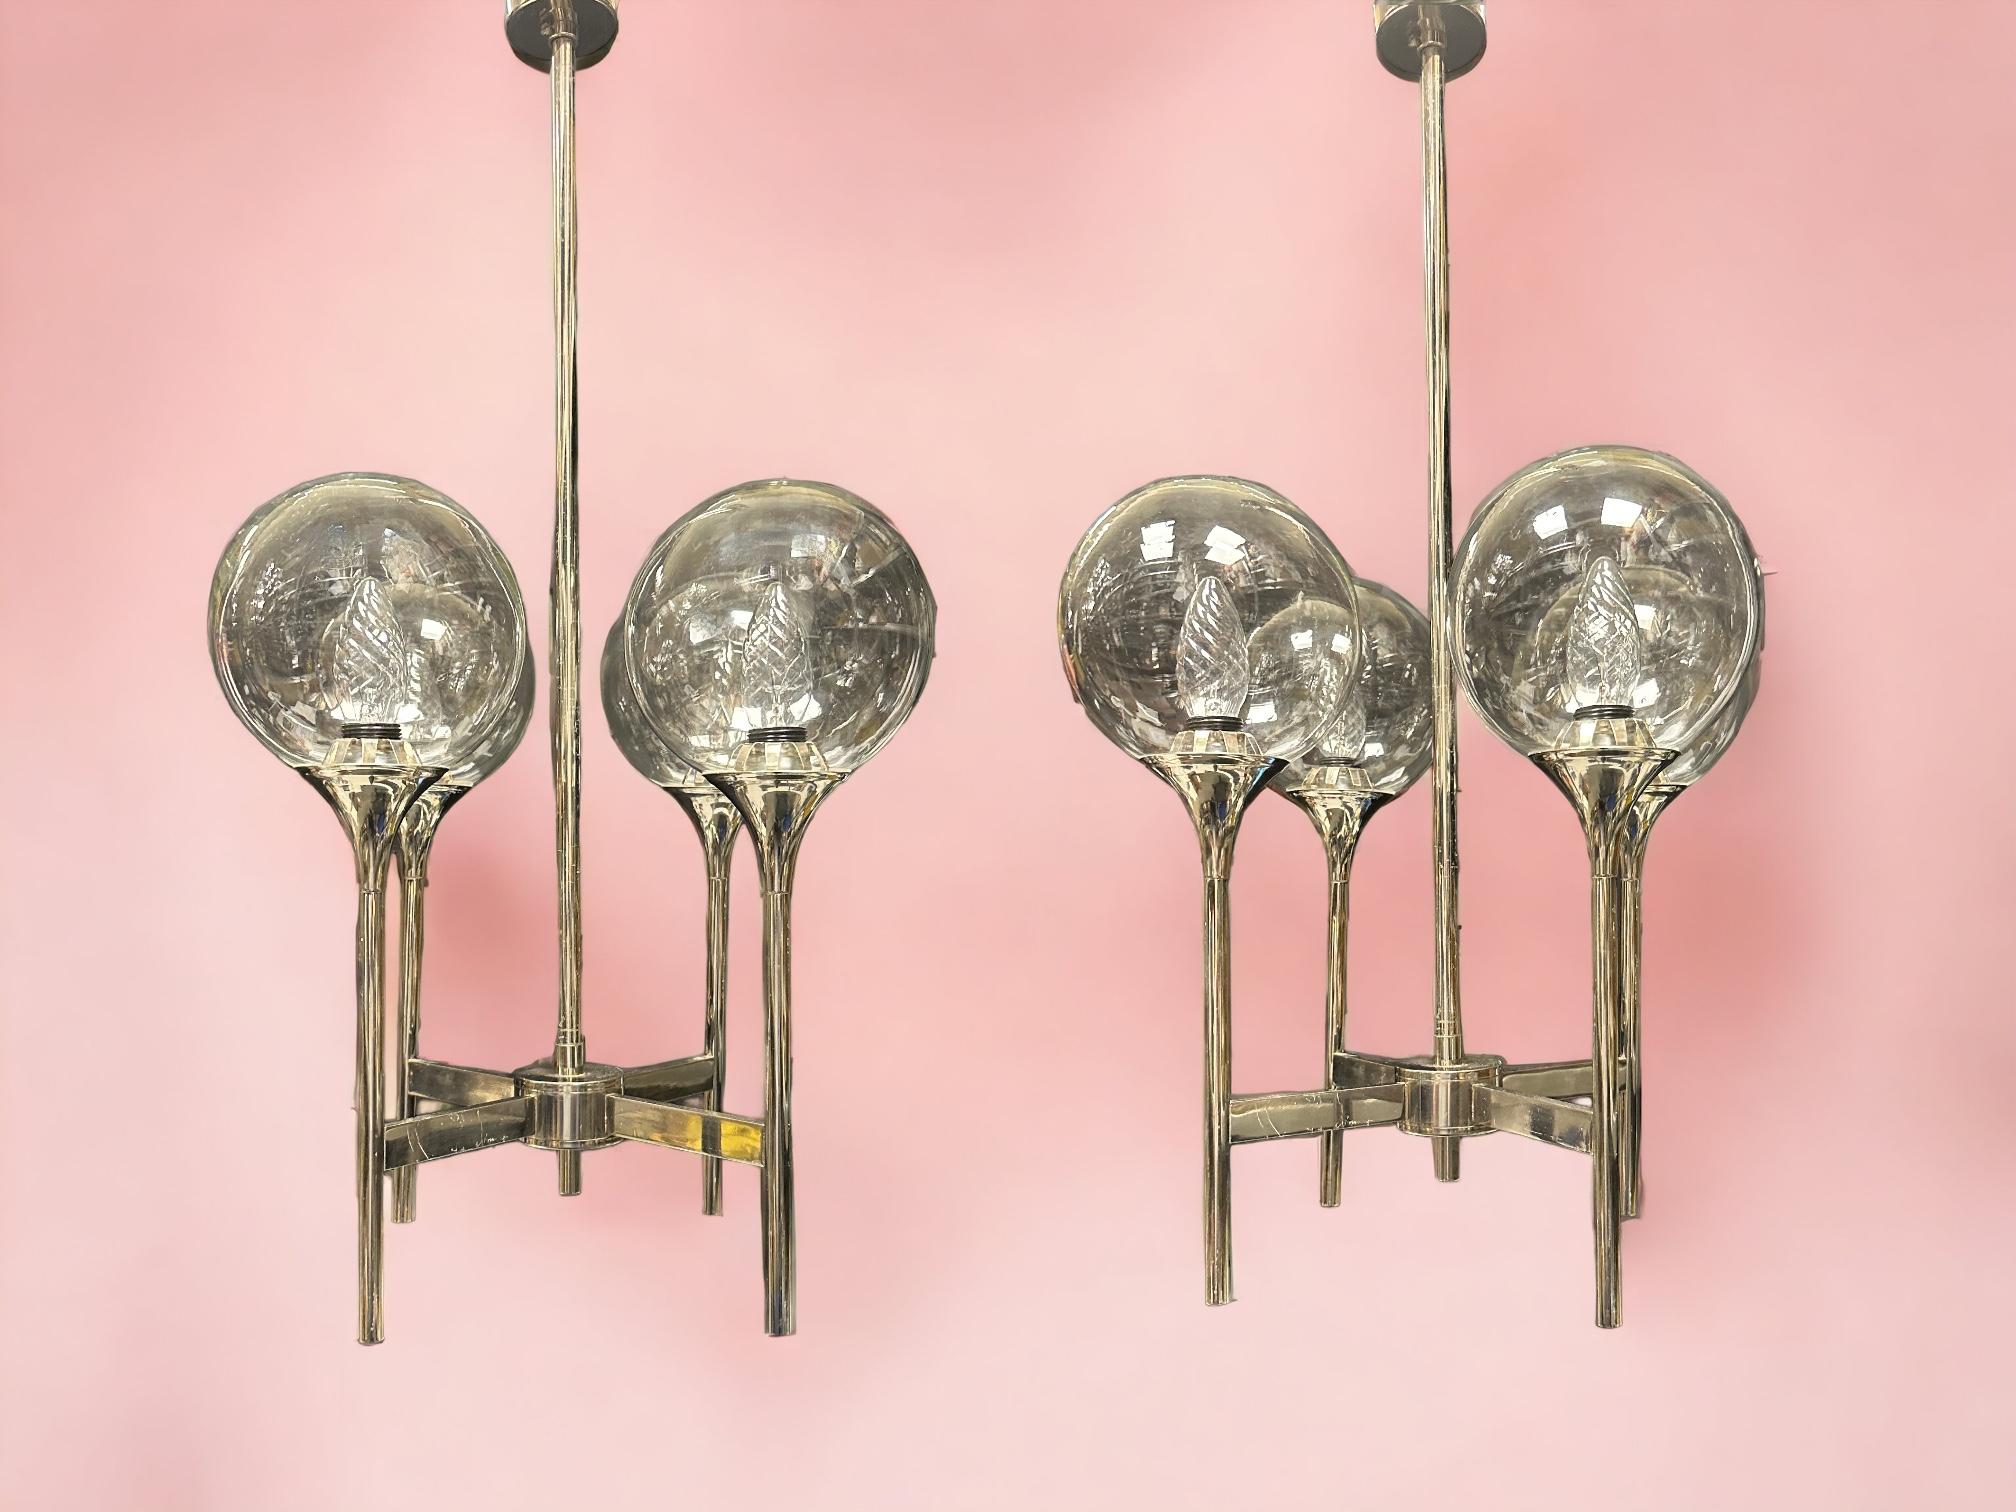 A set of two Amazing four armed chromed Trumpet lamp Reggiani/Sciolari style 1970s. Very rare and hard to find as a pair of two. Made probably in Italy, 1970s. Each Chandelier requires four European E14 candelabra bulbs, each up to 40 watts. Chrome